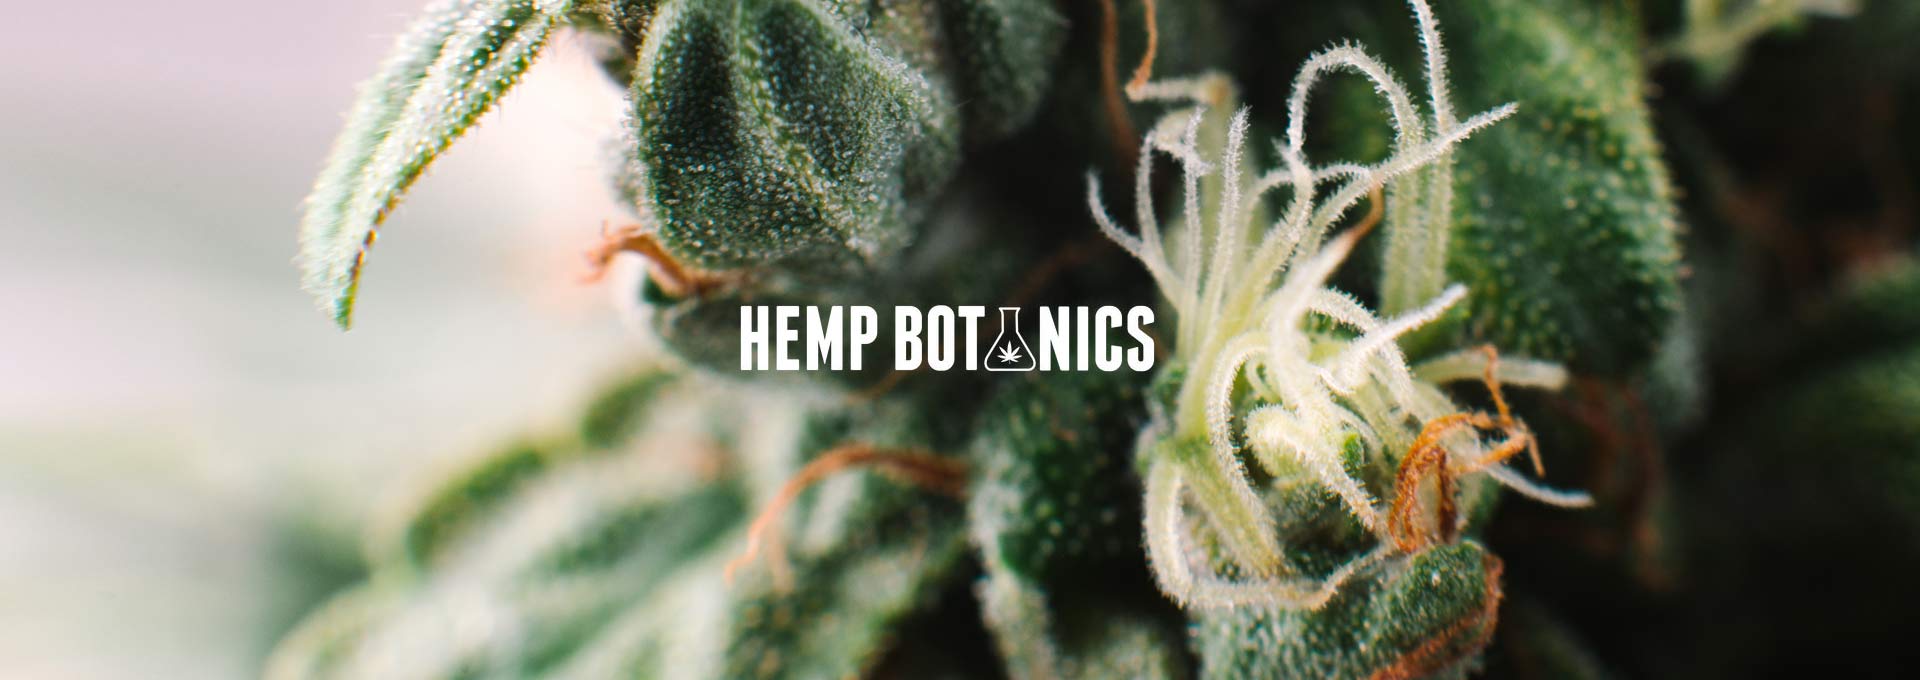 Read our Hemp Botanics Review and buy CBD safely in the UK